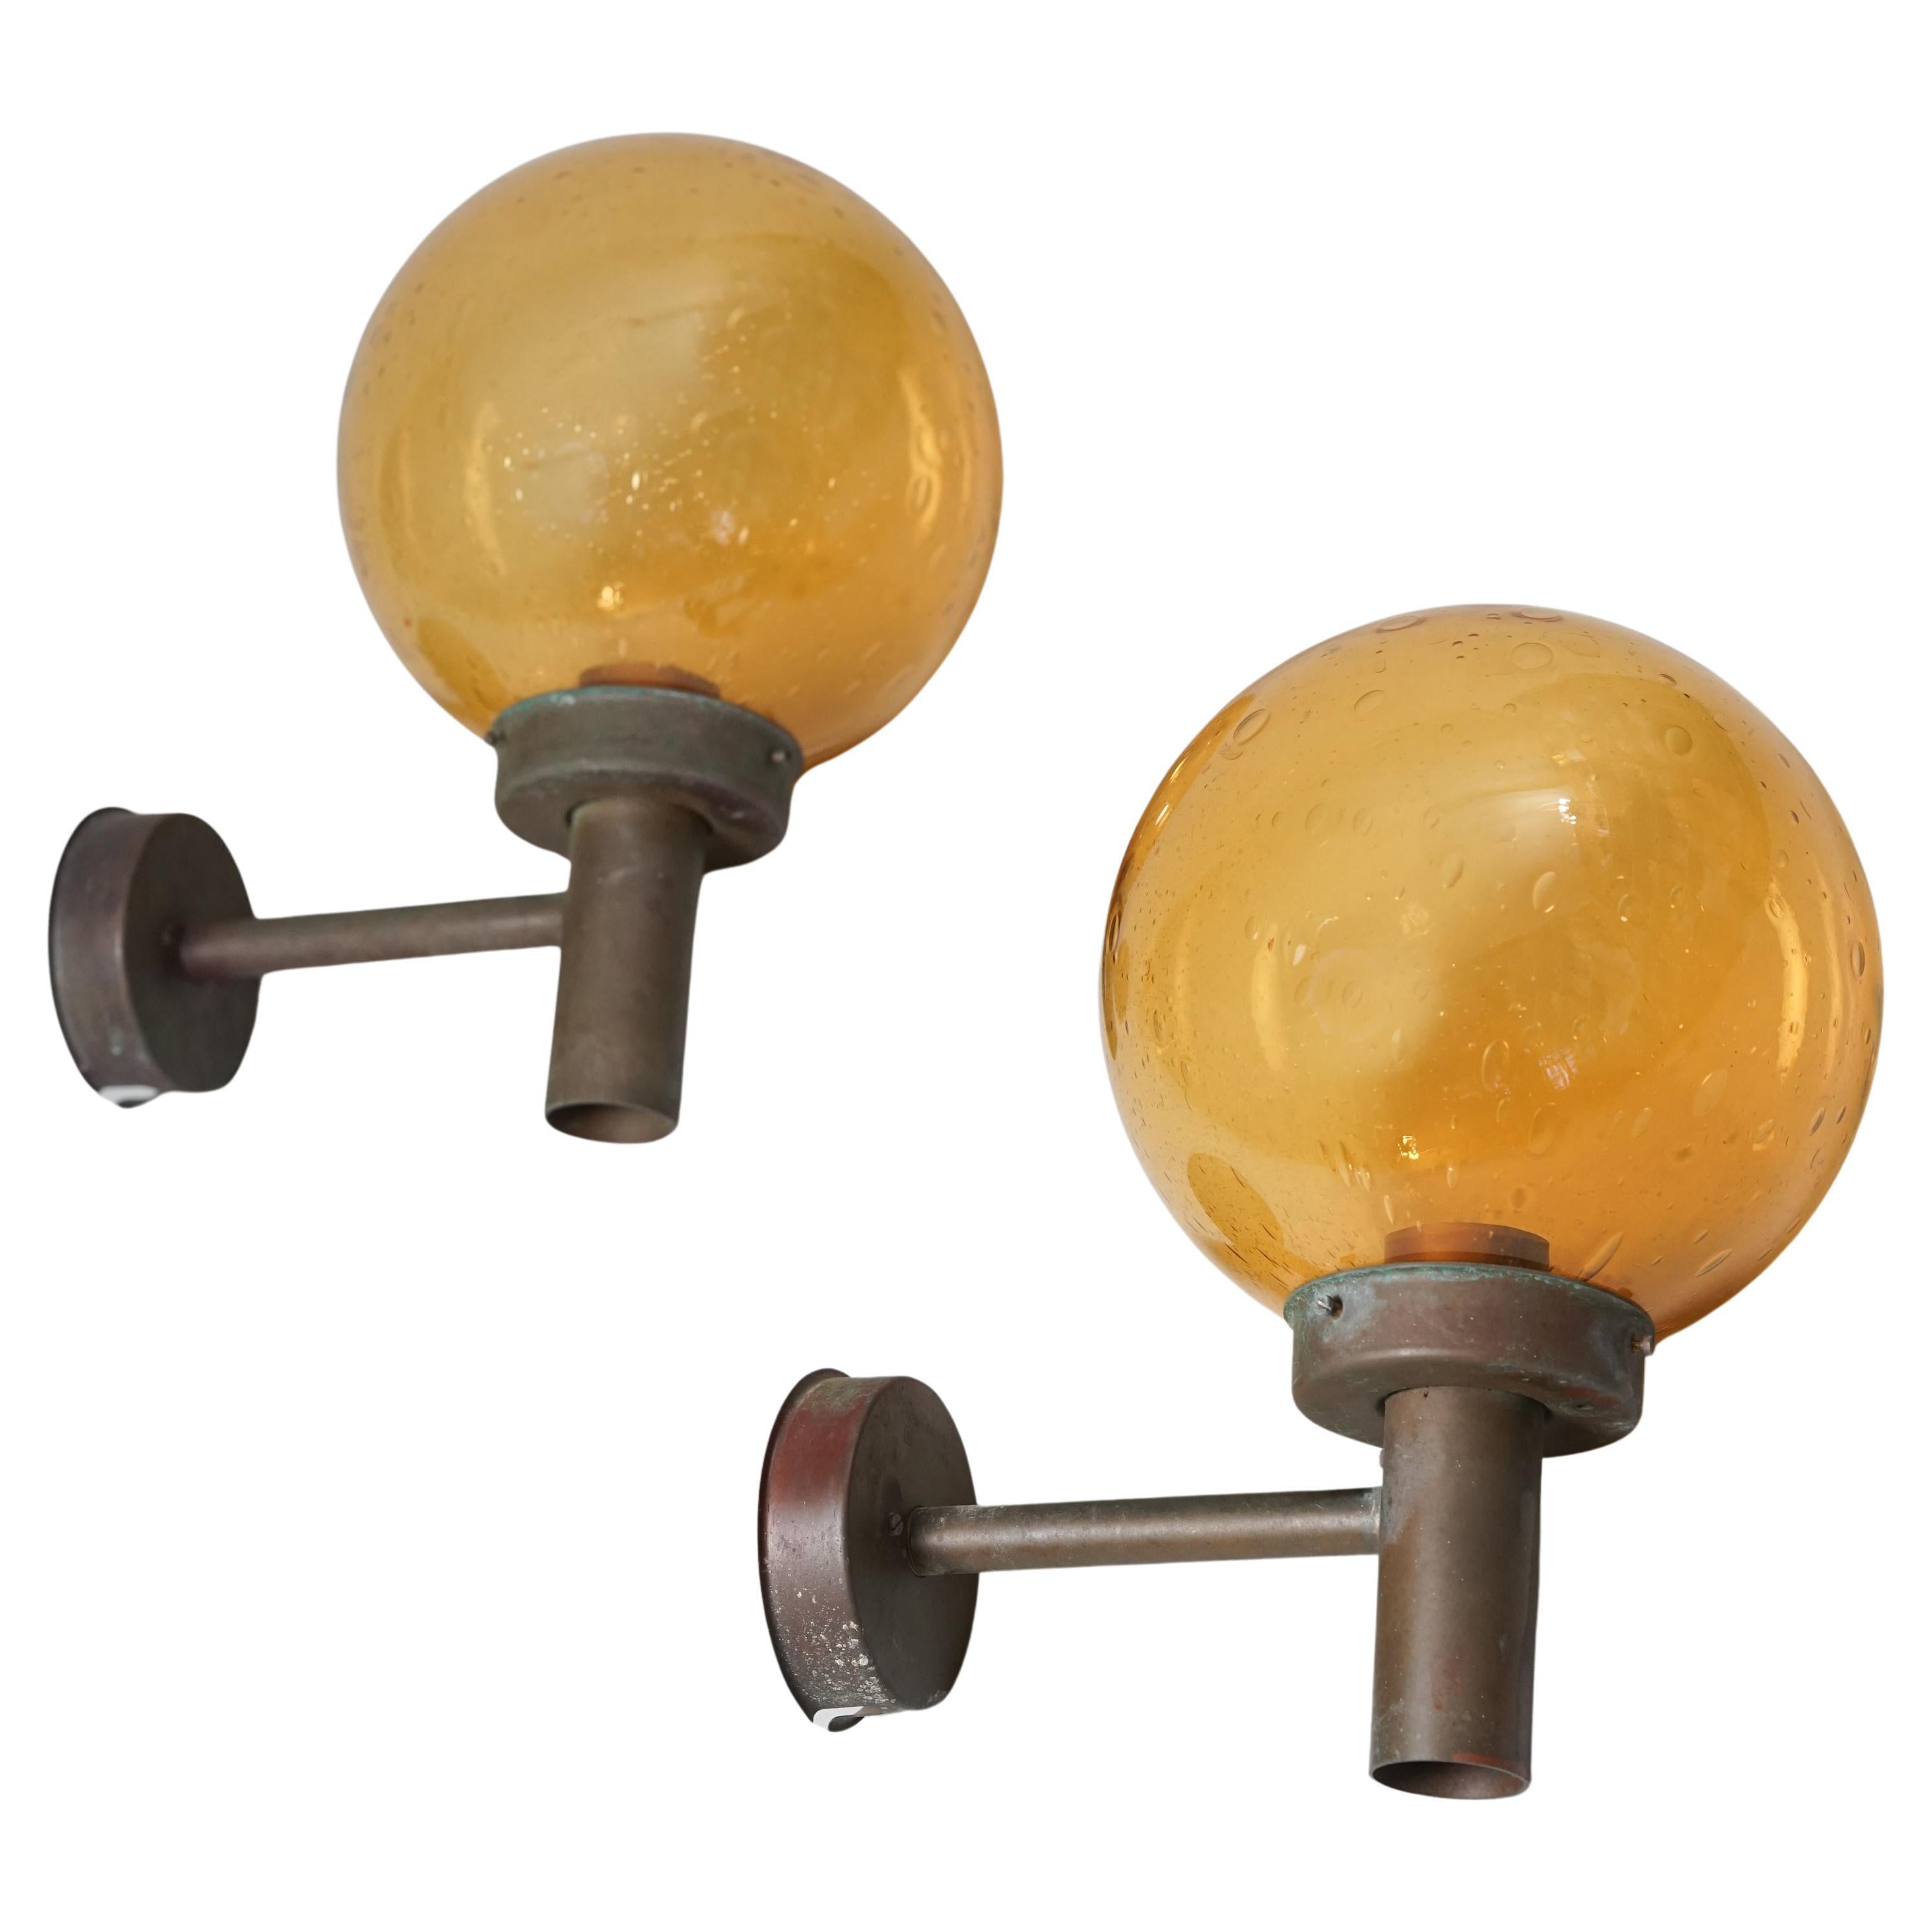 Pair of Outdoor Wall Lights, Lisa Johansson-Pape, Orno Oy, 1950s For Sale